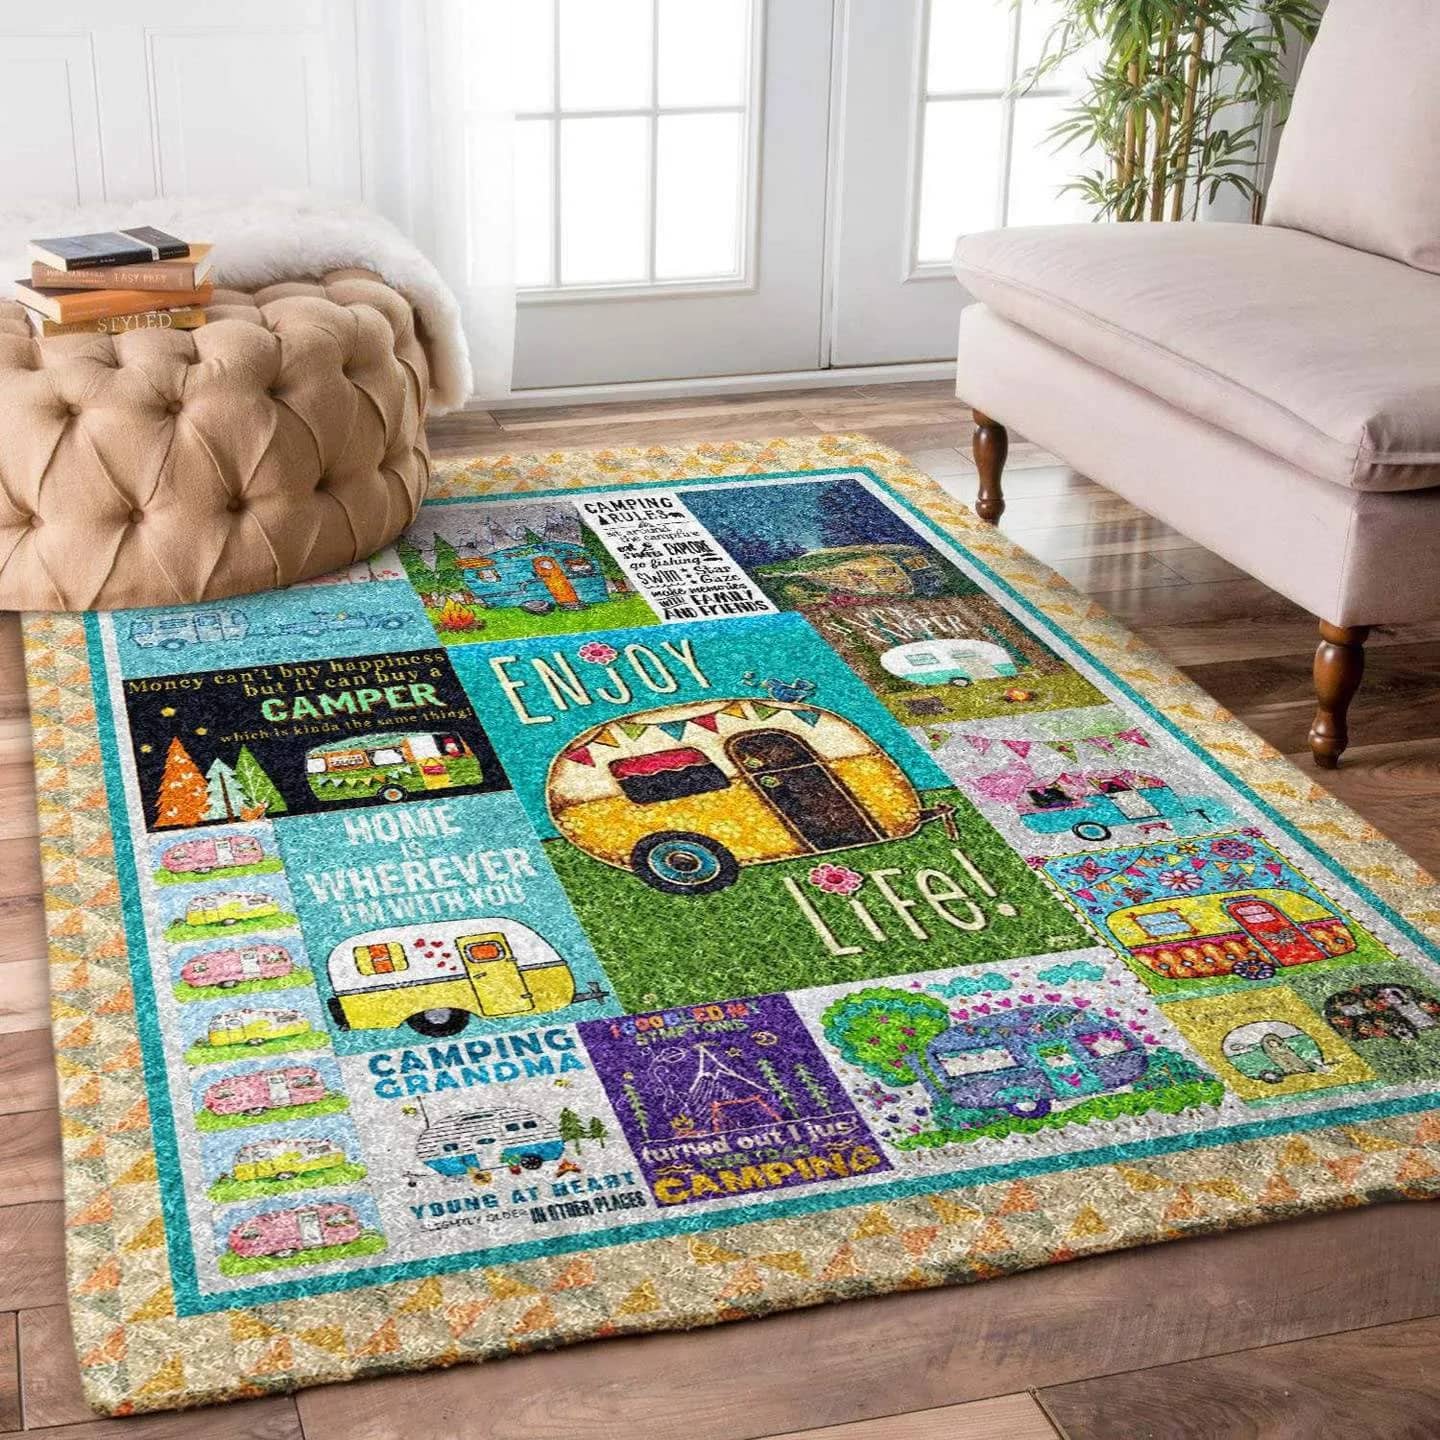 Camping Limited Edition Amazon Best Seller Sku 262608 Rug